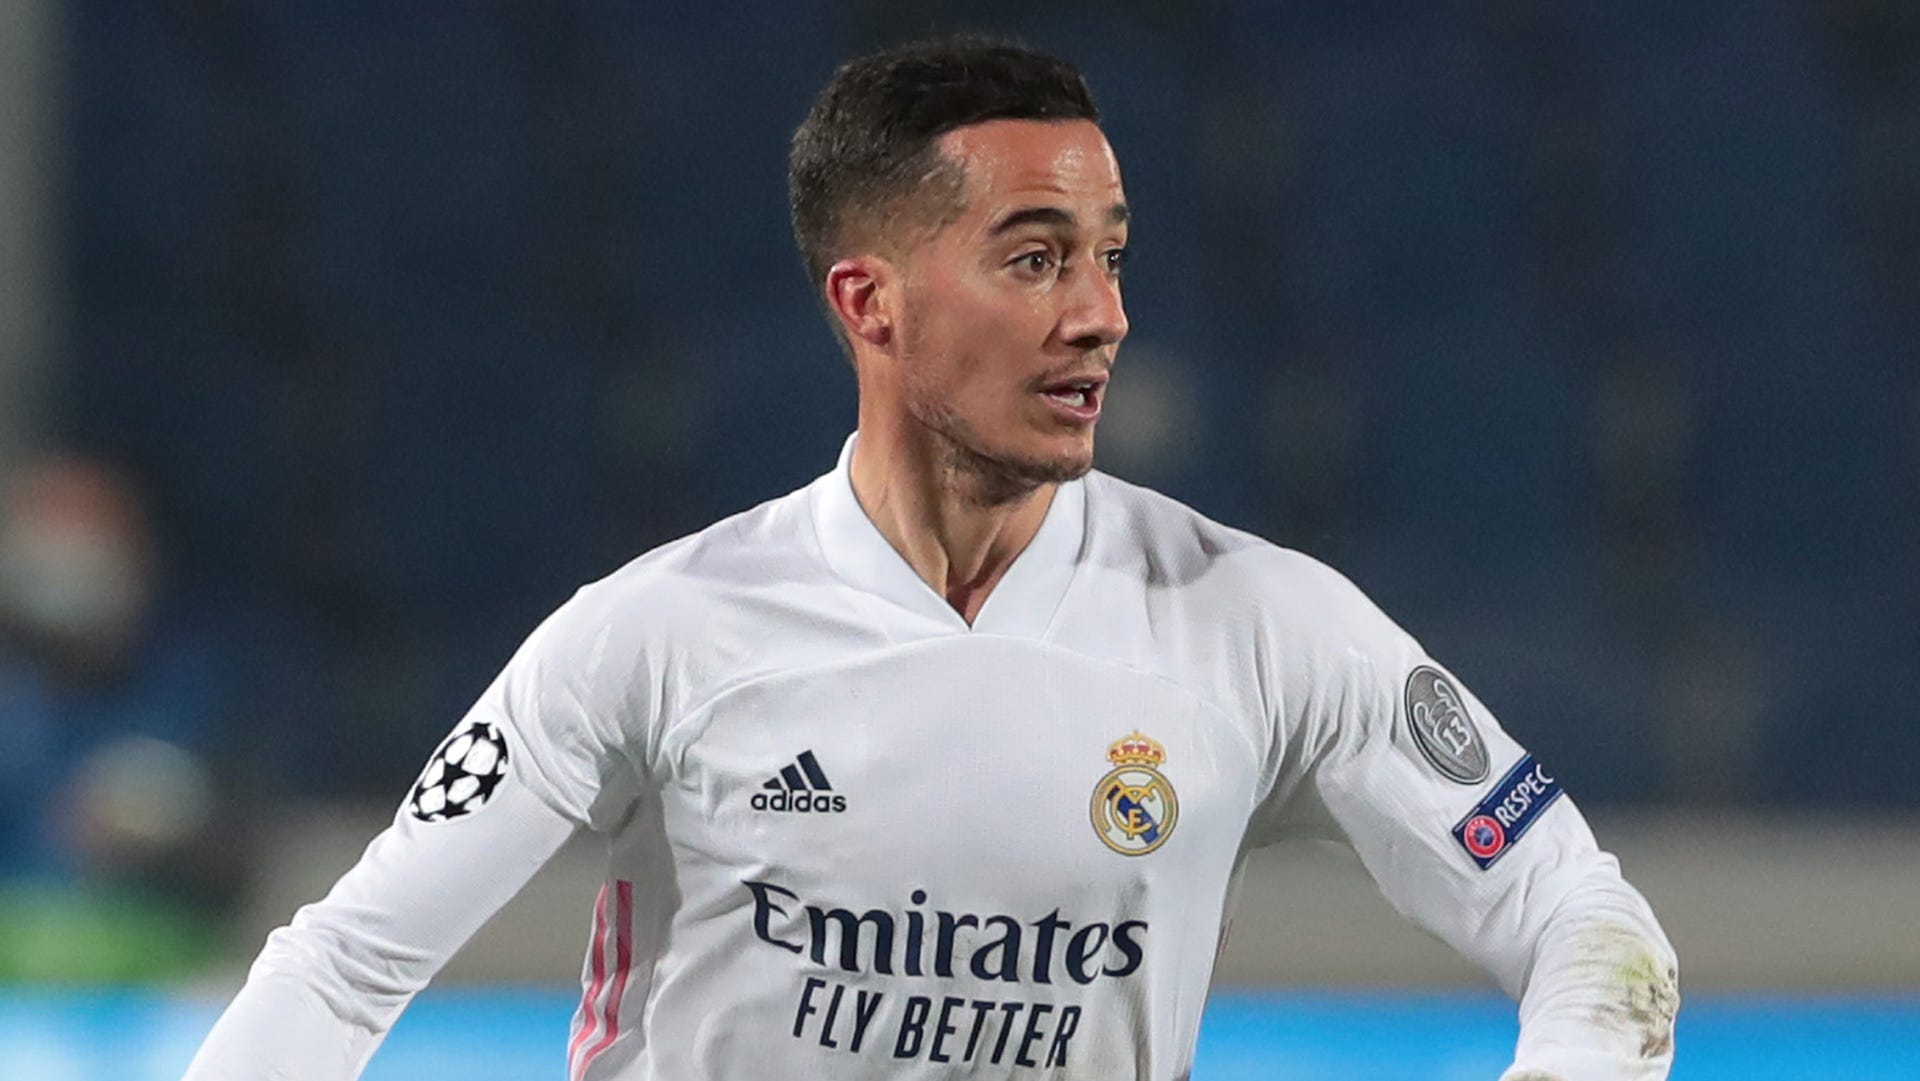 Who wouldn't want to keep playing for the world's best club?' - Vazquez wants new Real Madrid | Goal.com